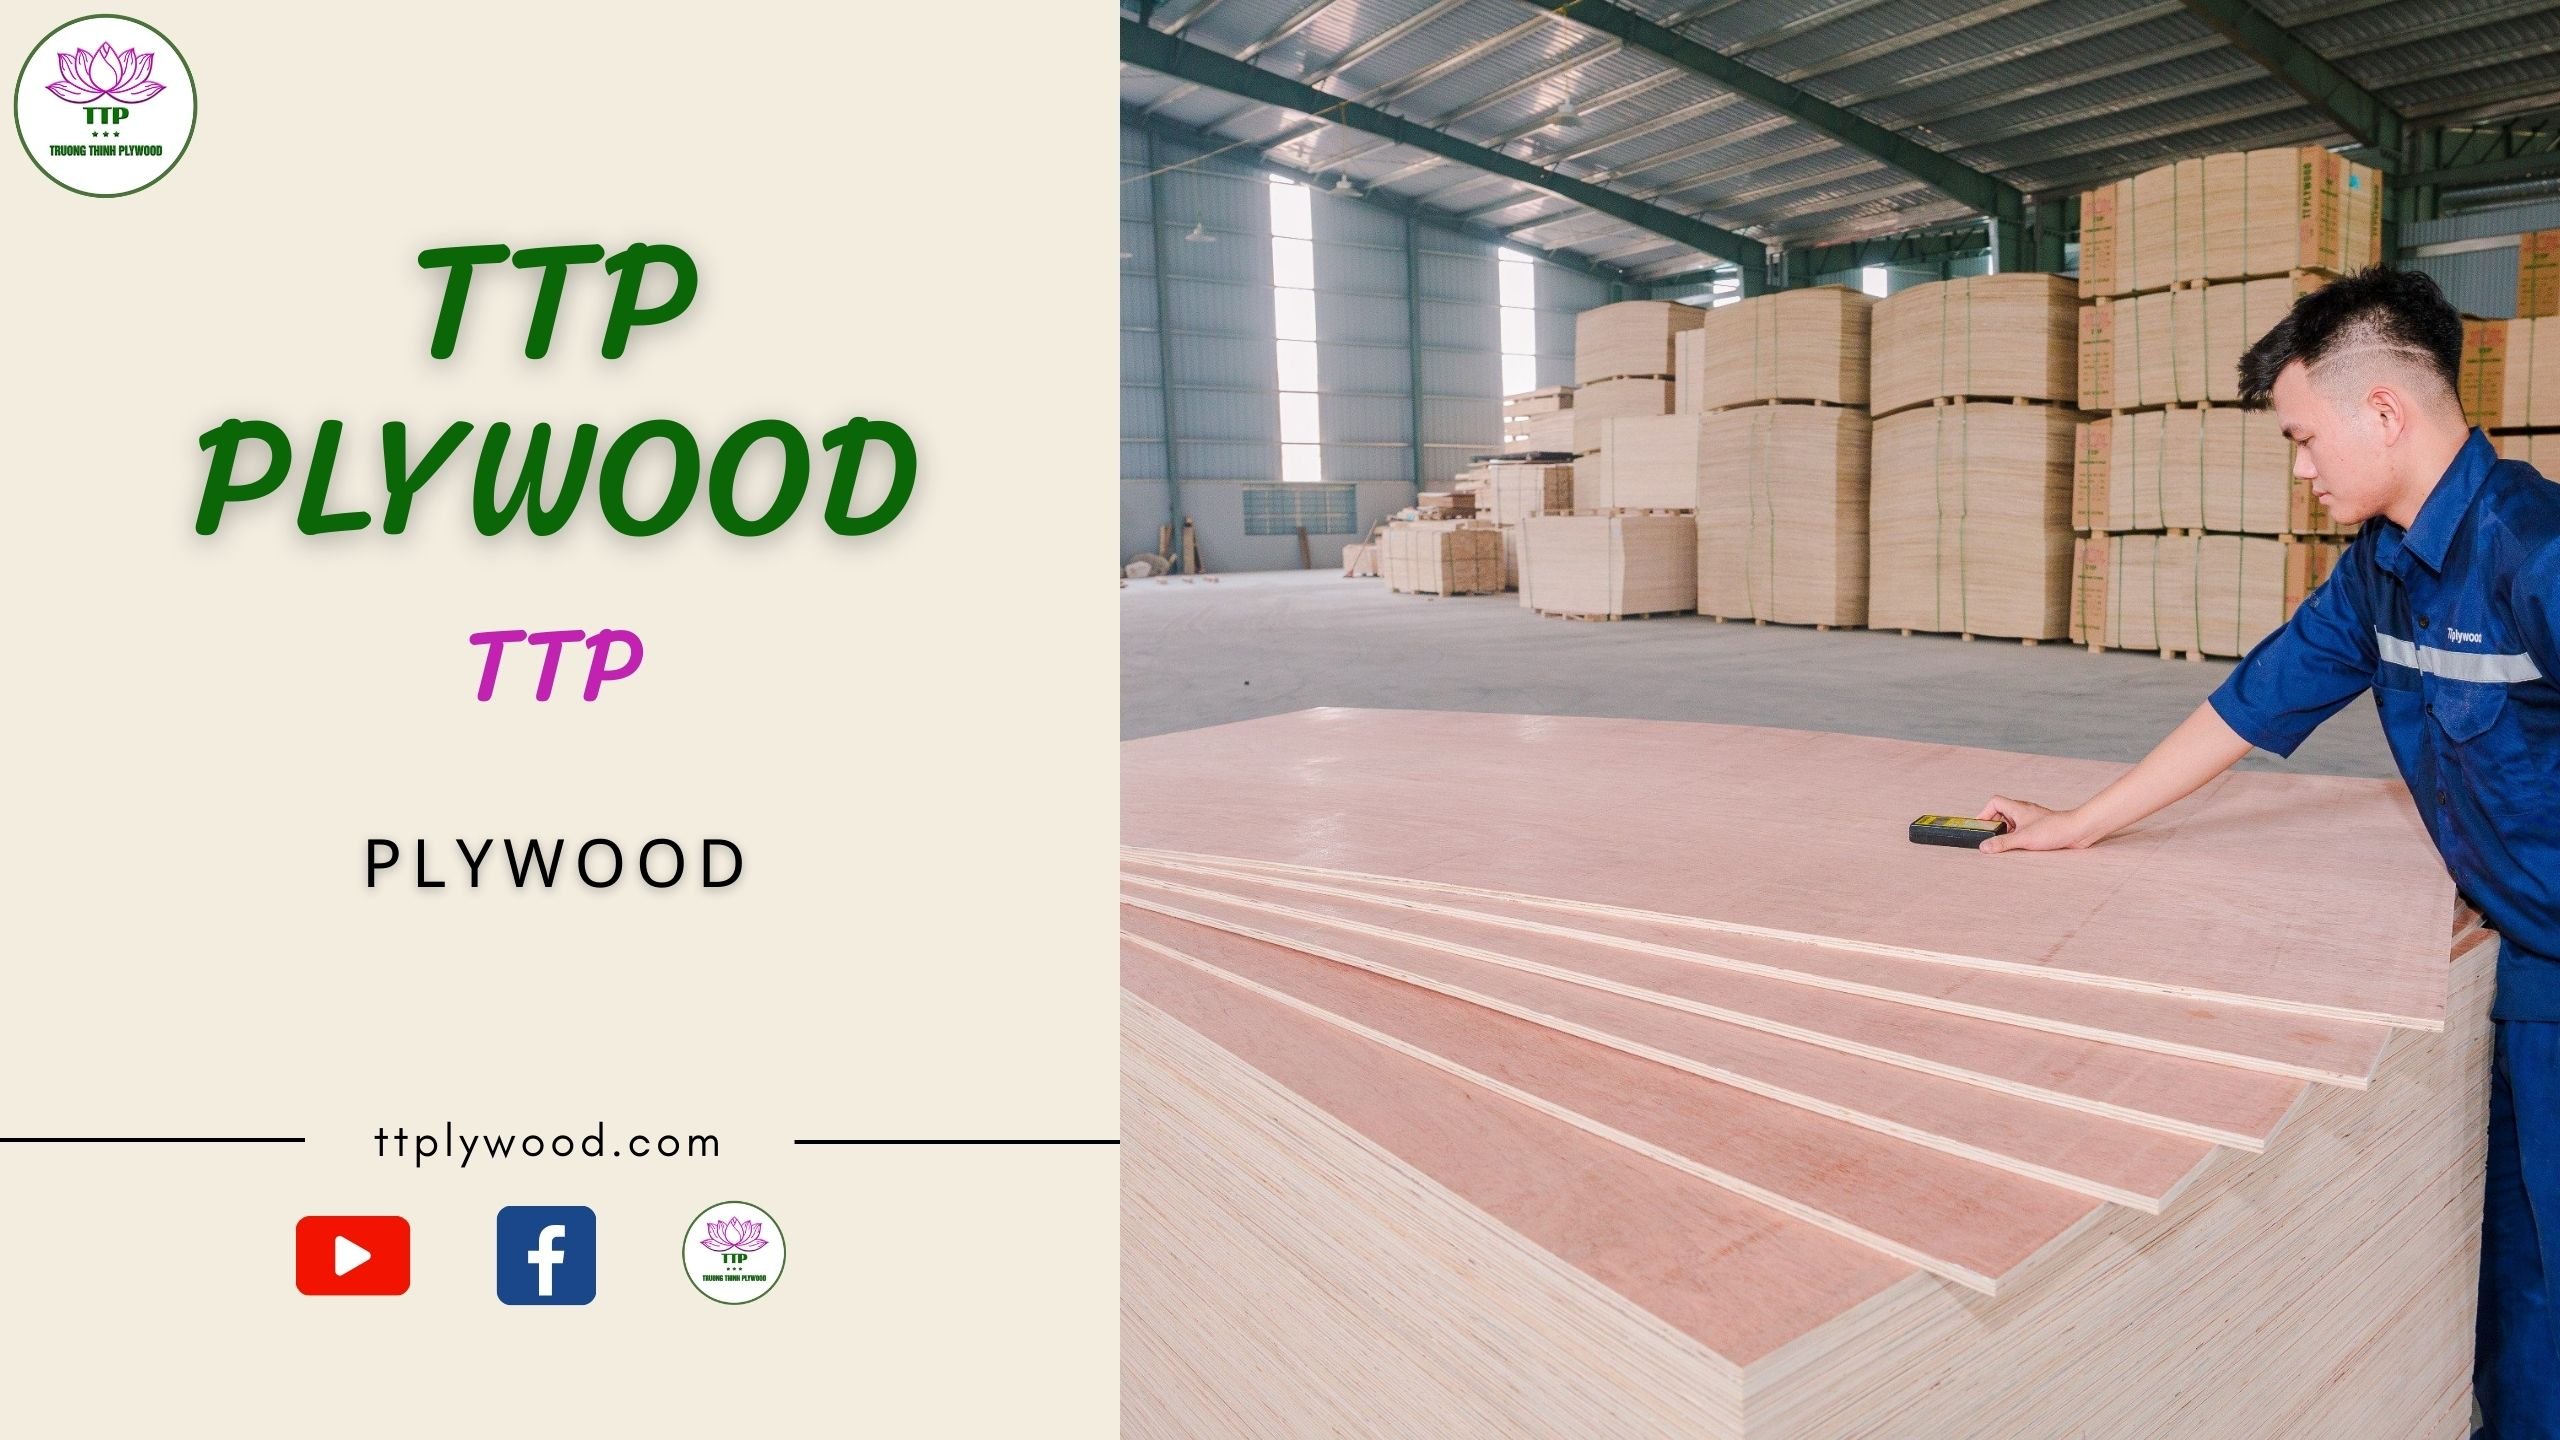 SOME USEFUL INFORMATION OF PLYWOOD THAT YOU NEED TO KNOW